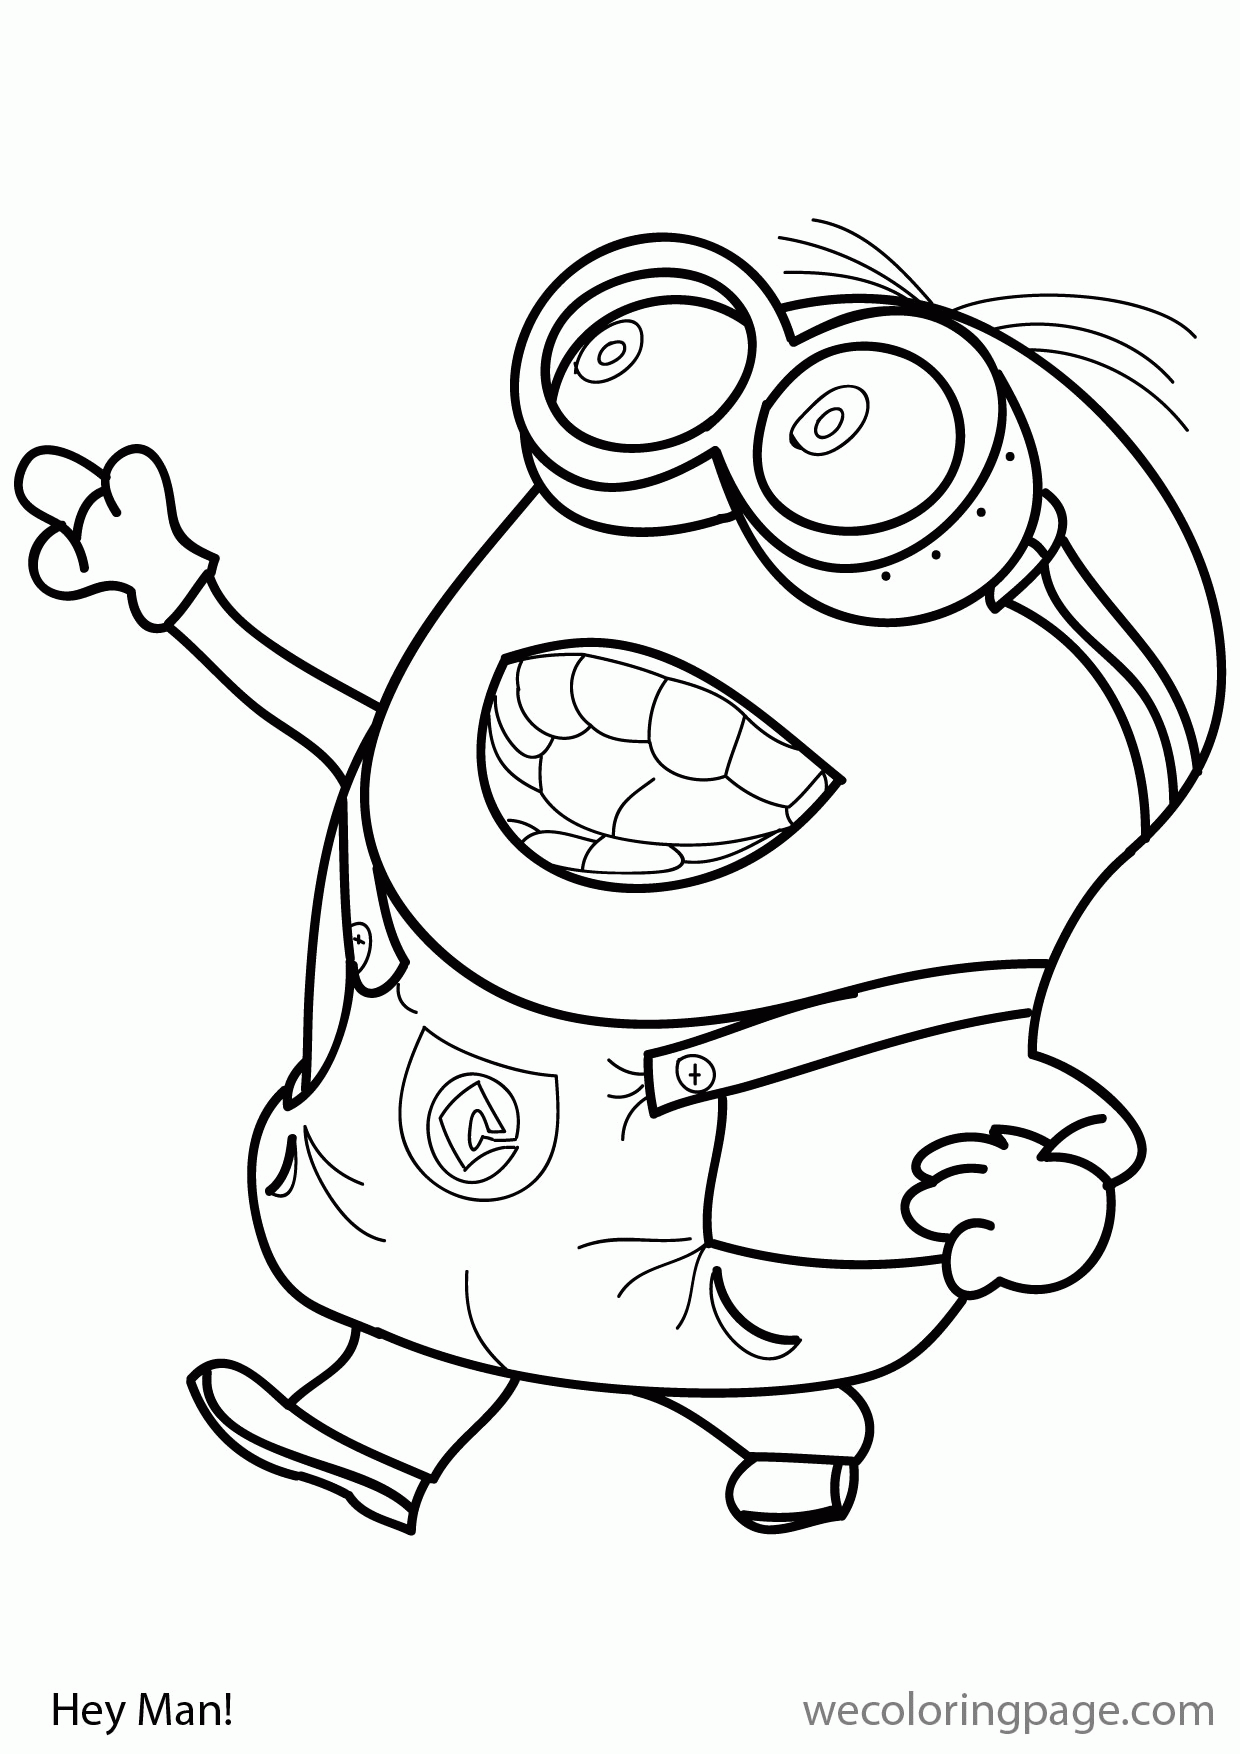 Minion_dave_hey_man_coloring_page 01 | Wecoloringpage